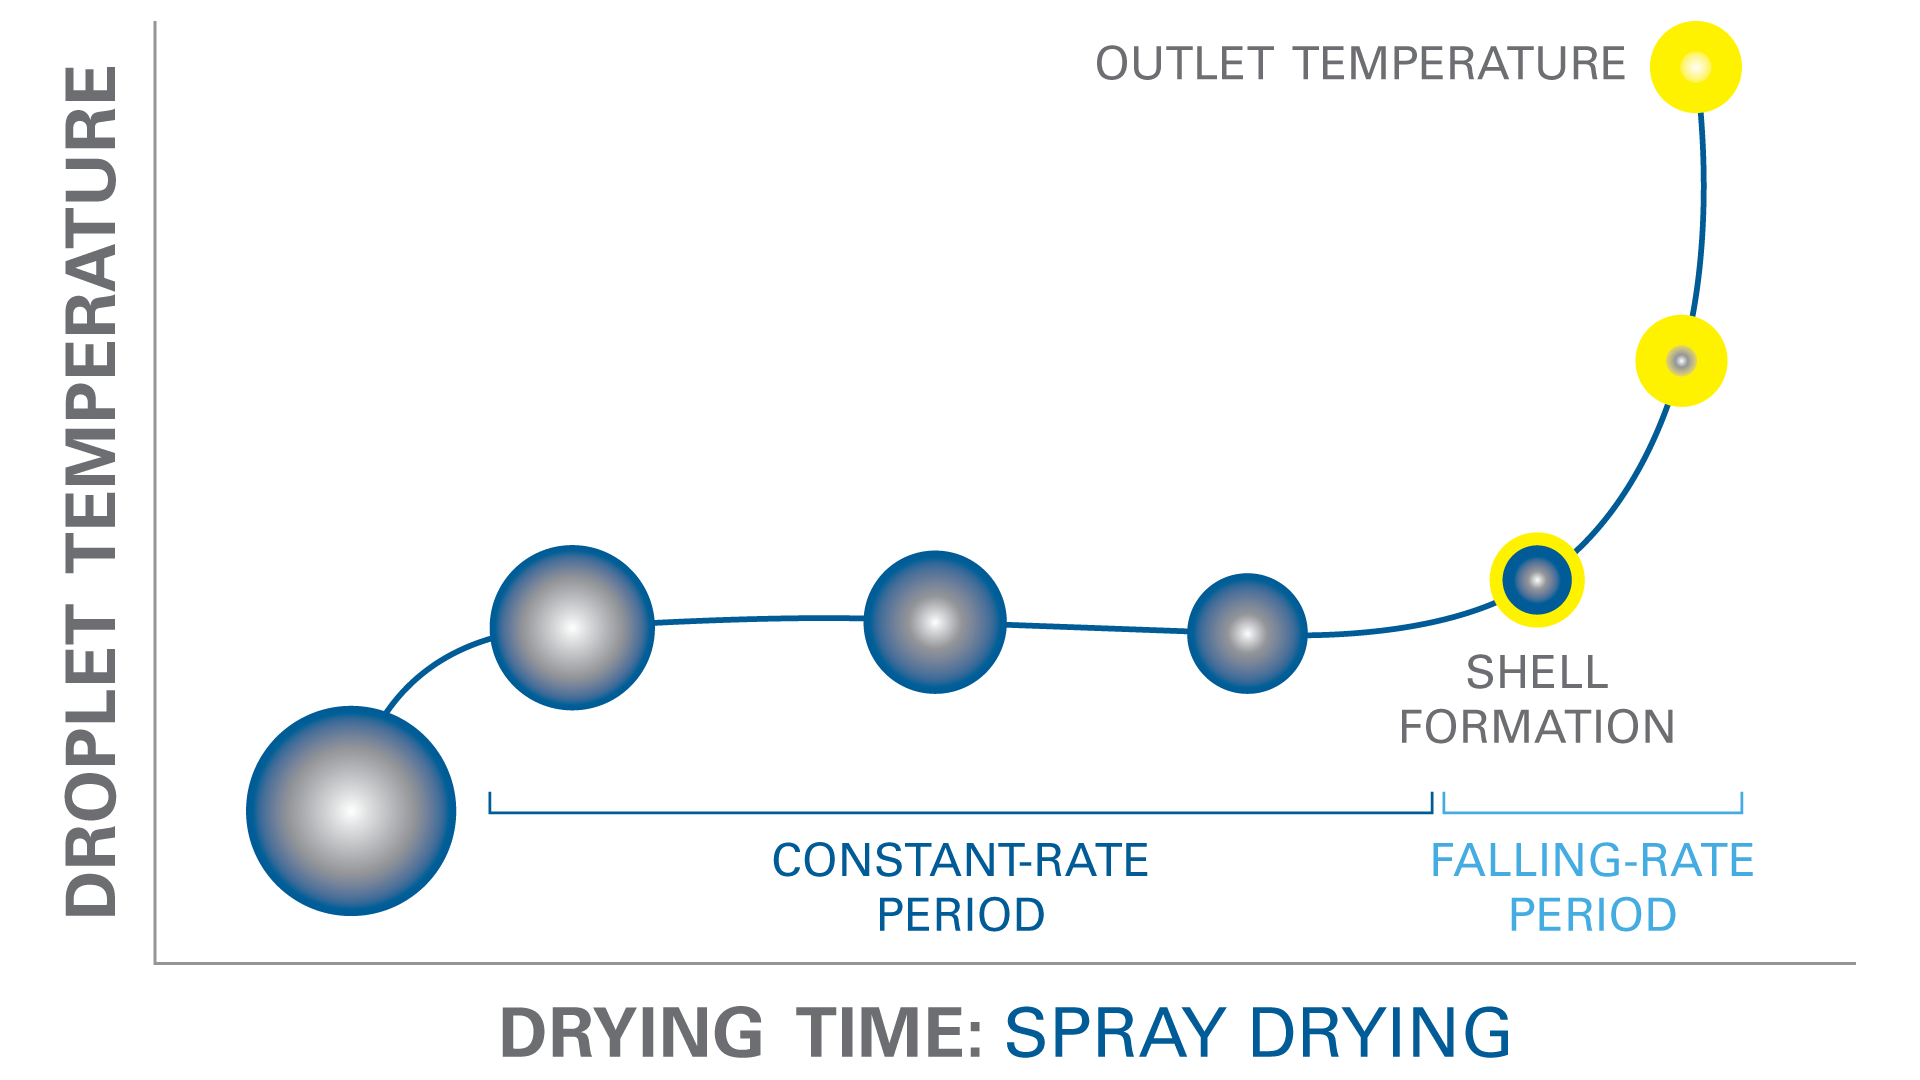 traditional spray drying temperature chart